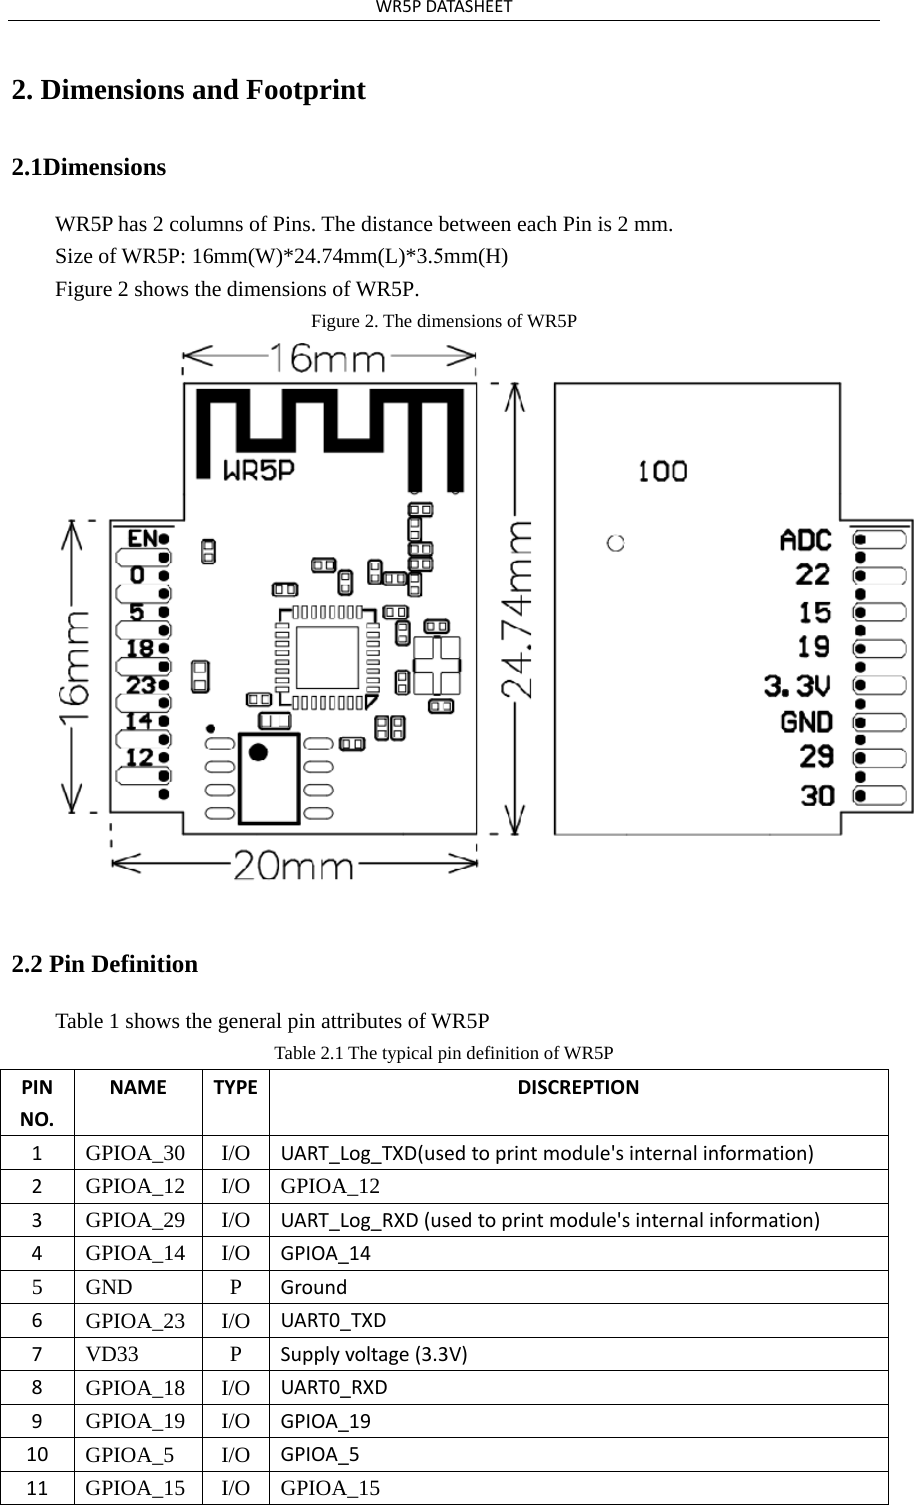 WR5PDATASHEET2. Dimensions and Footprint2.1Dimensions WR5P has 2 columns of Pins. The distance between each Pin is 2 mm. Size of WR5P: 16mm(W)*24.74mm(L)*3.5mm(H) Figure 2 shows the dimensions of WR5P. Figure 2. The dimensions of WR5P 2.2 Pin Definition Table 1 shows the general pin attributes of WR5P Table 2.1 The typical pin definition of WR5P PINNO.NAMETYPEDISCREPTION1GPIOA_30 I/O UART_Log_TXD(usedtoprintmodule&apos;sinternalinformation)2GPIOA_12 I/O GPIOA_12 3GPIOA_29 I/O UART_Log_RXD(usedtoprintmodule&apos;sinternalinformation)4GPIOA_14 I/O GPIOA_145 GND  P Ground6GPIOA_23 I/O UART0_TXD 7VD33 P Supplyvoltage(3.3V) 8GPIOA_18 I/O UART0_RXD9GPIOA_19 I/O GPIOA_19 10GPIOA_5 I/O GPIOA_511GPIOA_15 I/O GPIOA_15 